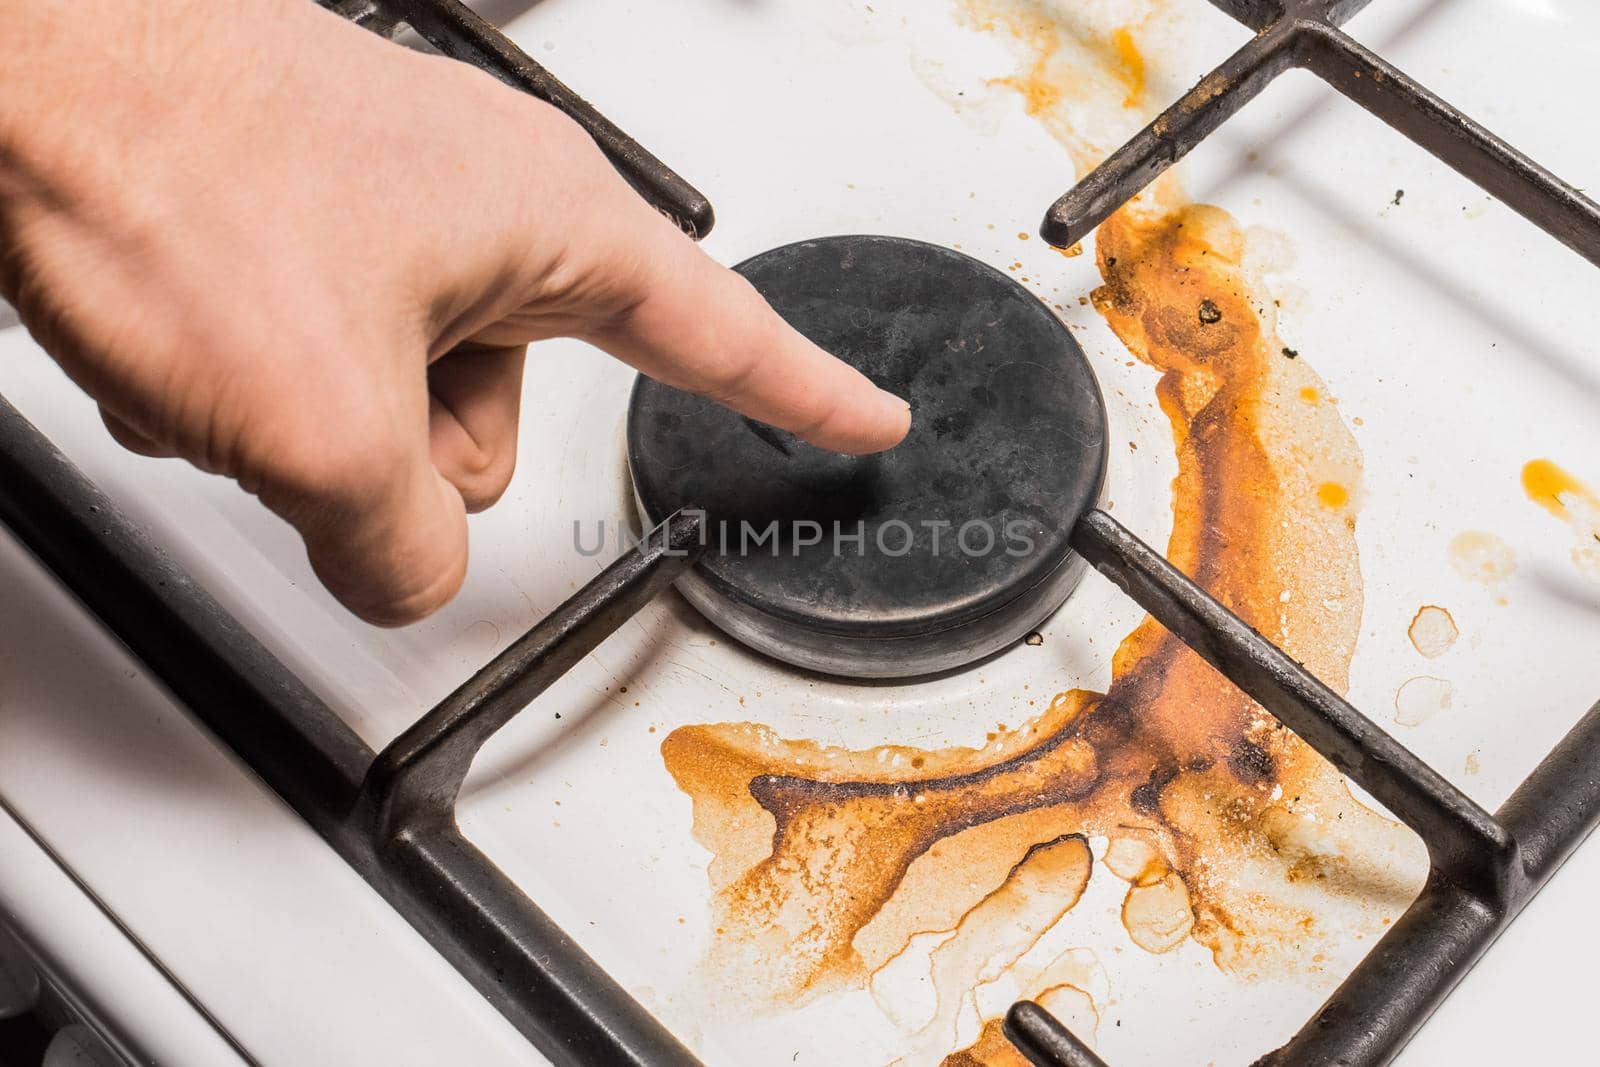 The guy's hand points a finger at the dirty plaque on the gas stove, close-up by AYDO8